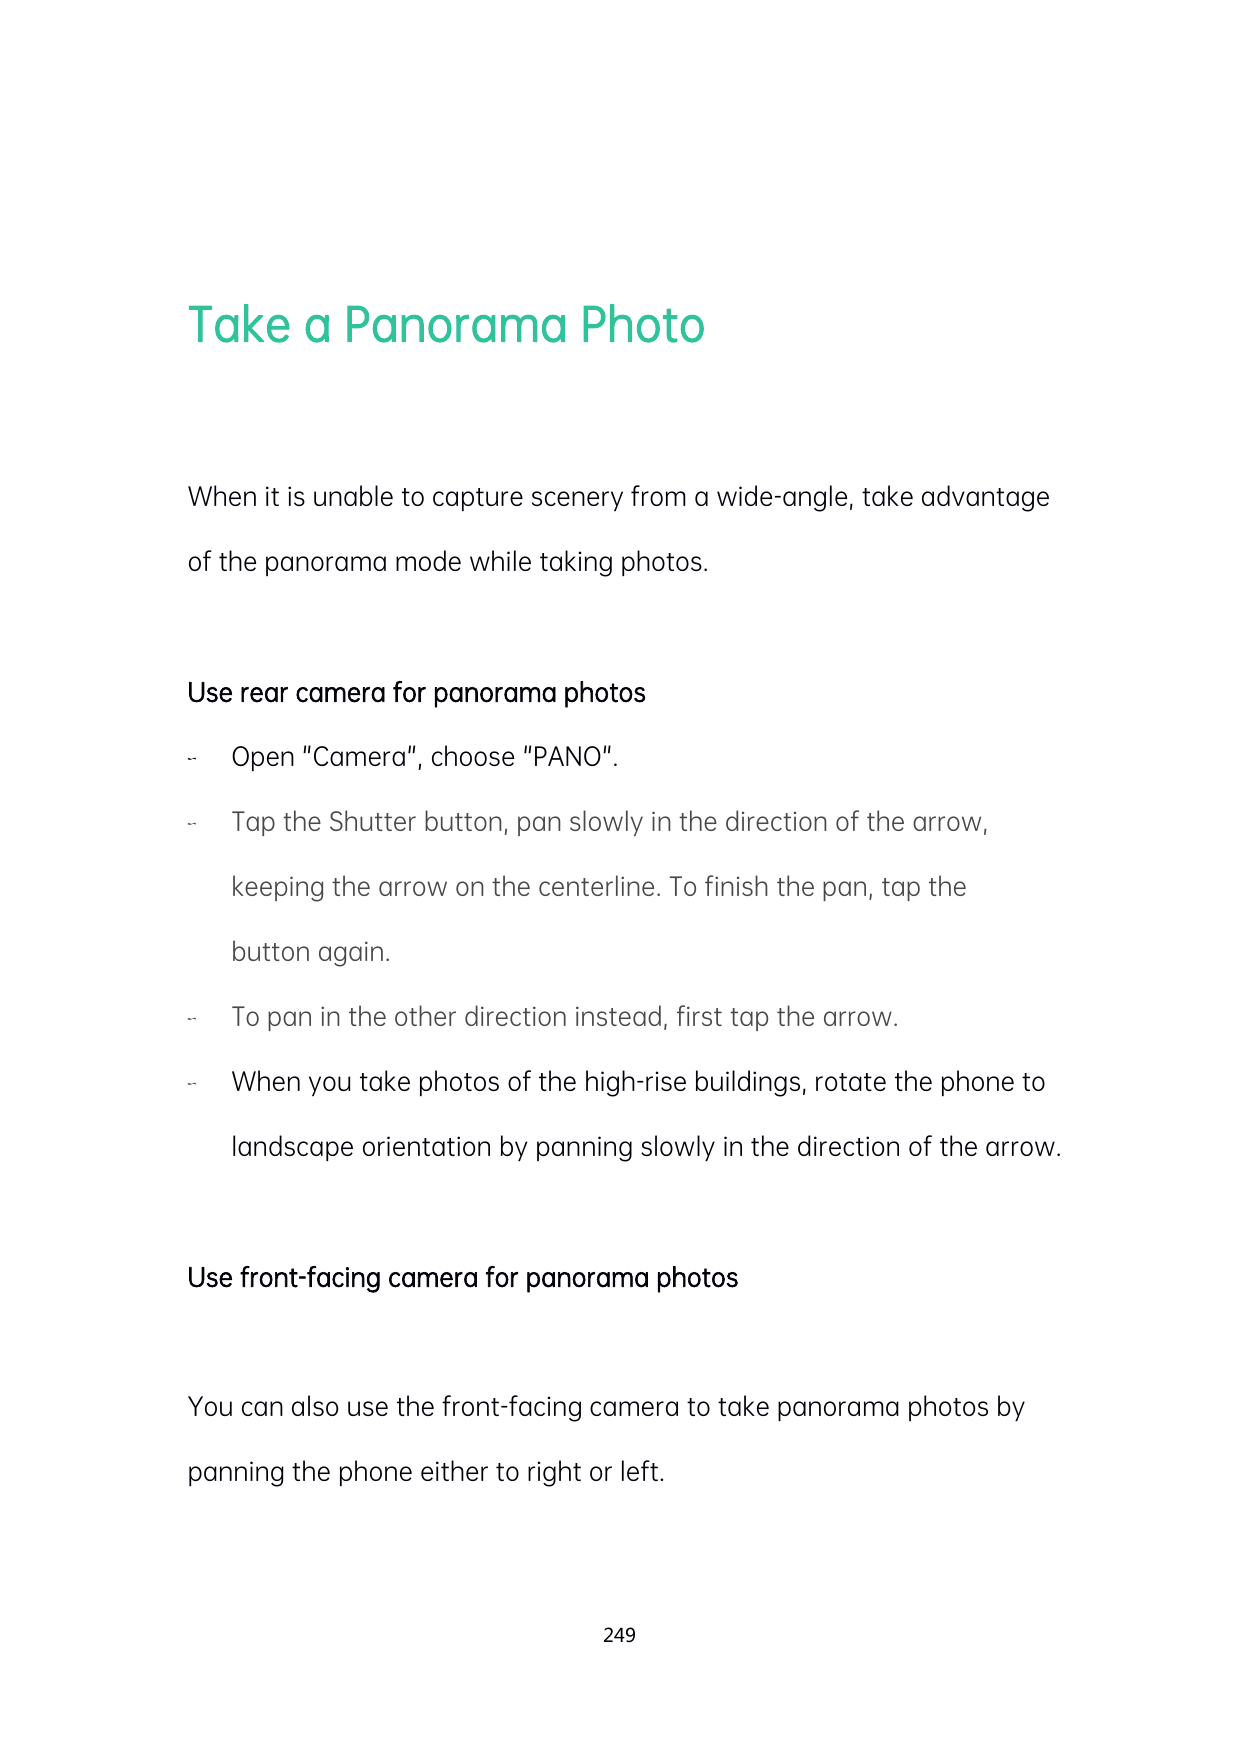 Take a Panorama PhotoWhen it is unable to capture scenery from a wide-angle, take advantageof the panorama mode while taking pho